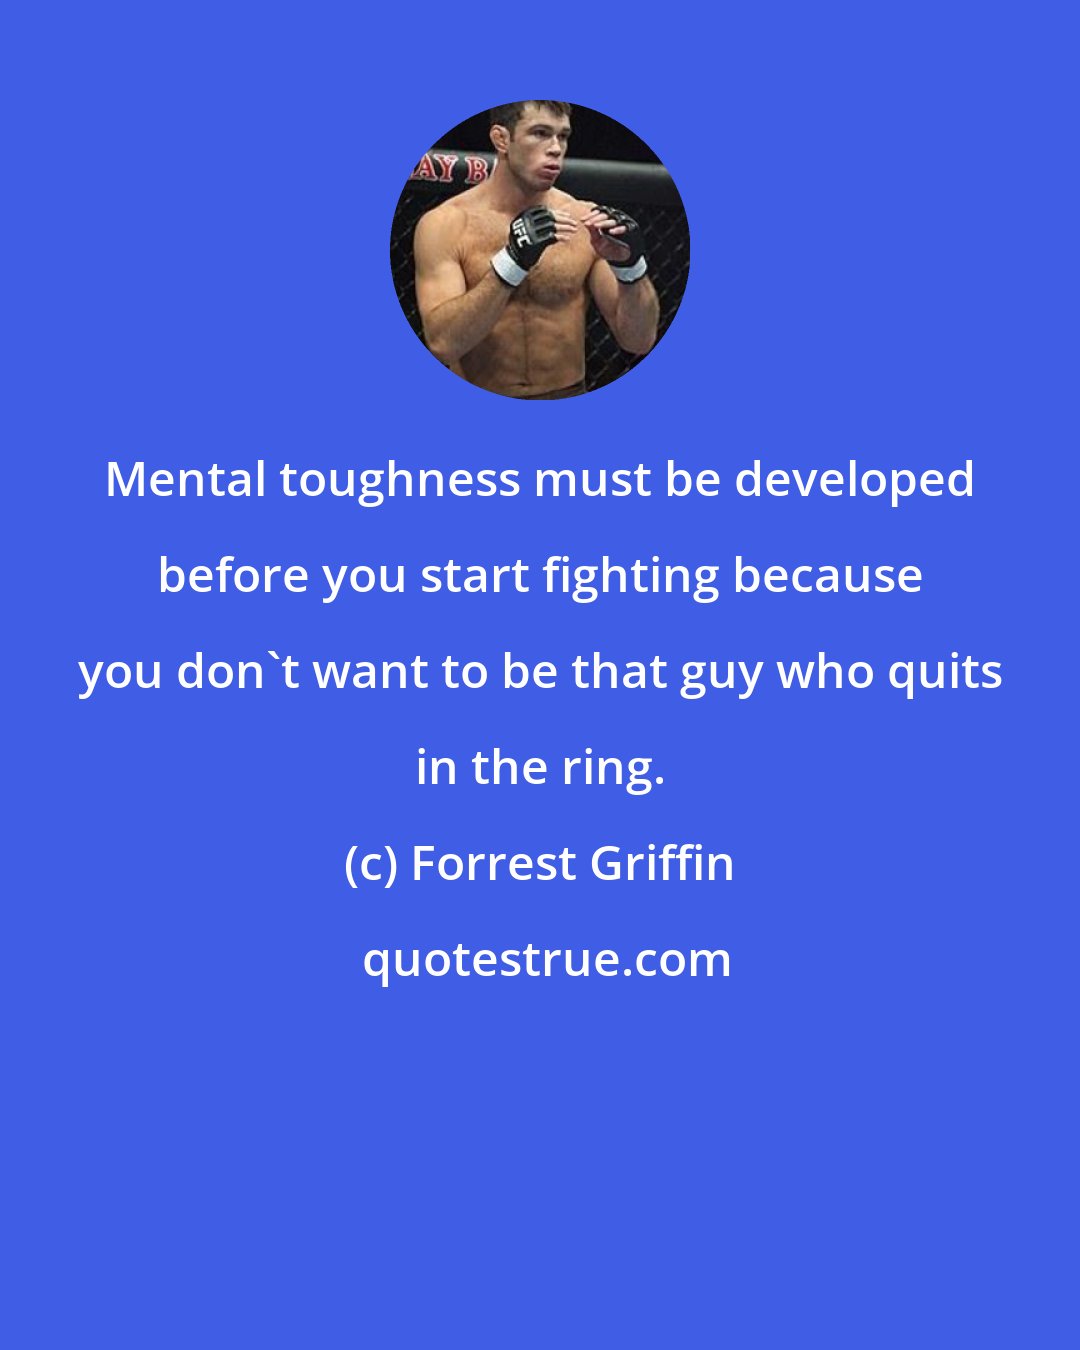 Forrest Griffin: Mental toughness must be developed before you start fighting because you don't want to be that guy who quits in the ring.